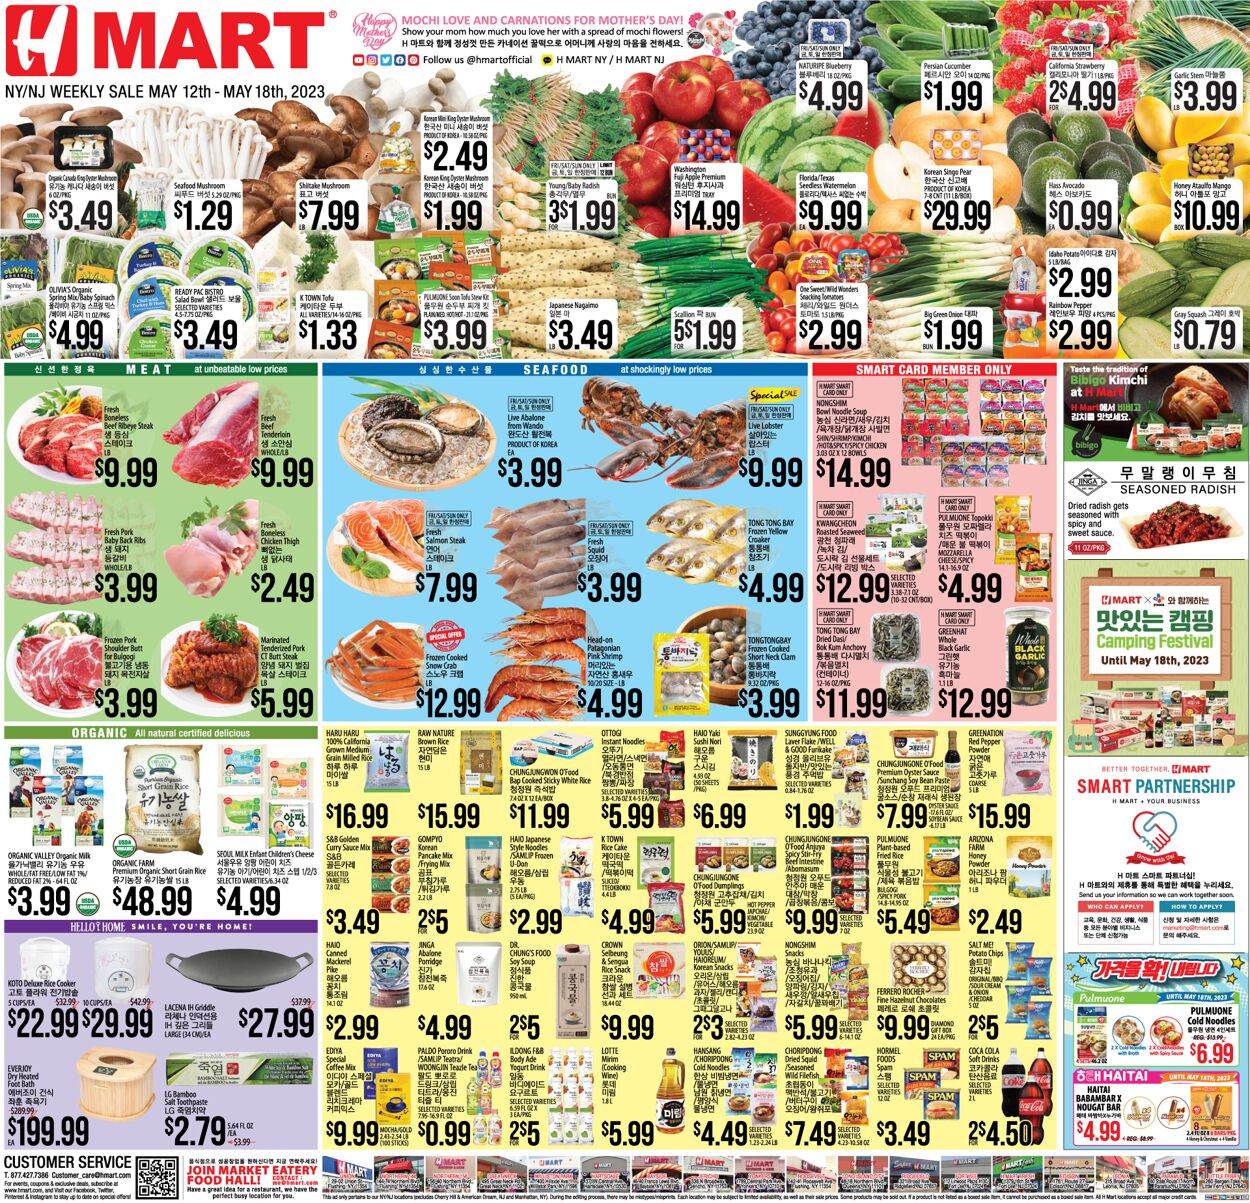 Weekly ad H-Mart 05/12/2023 - 05/18/2023